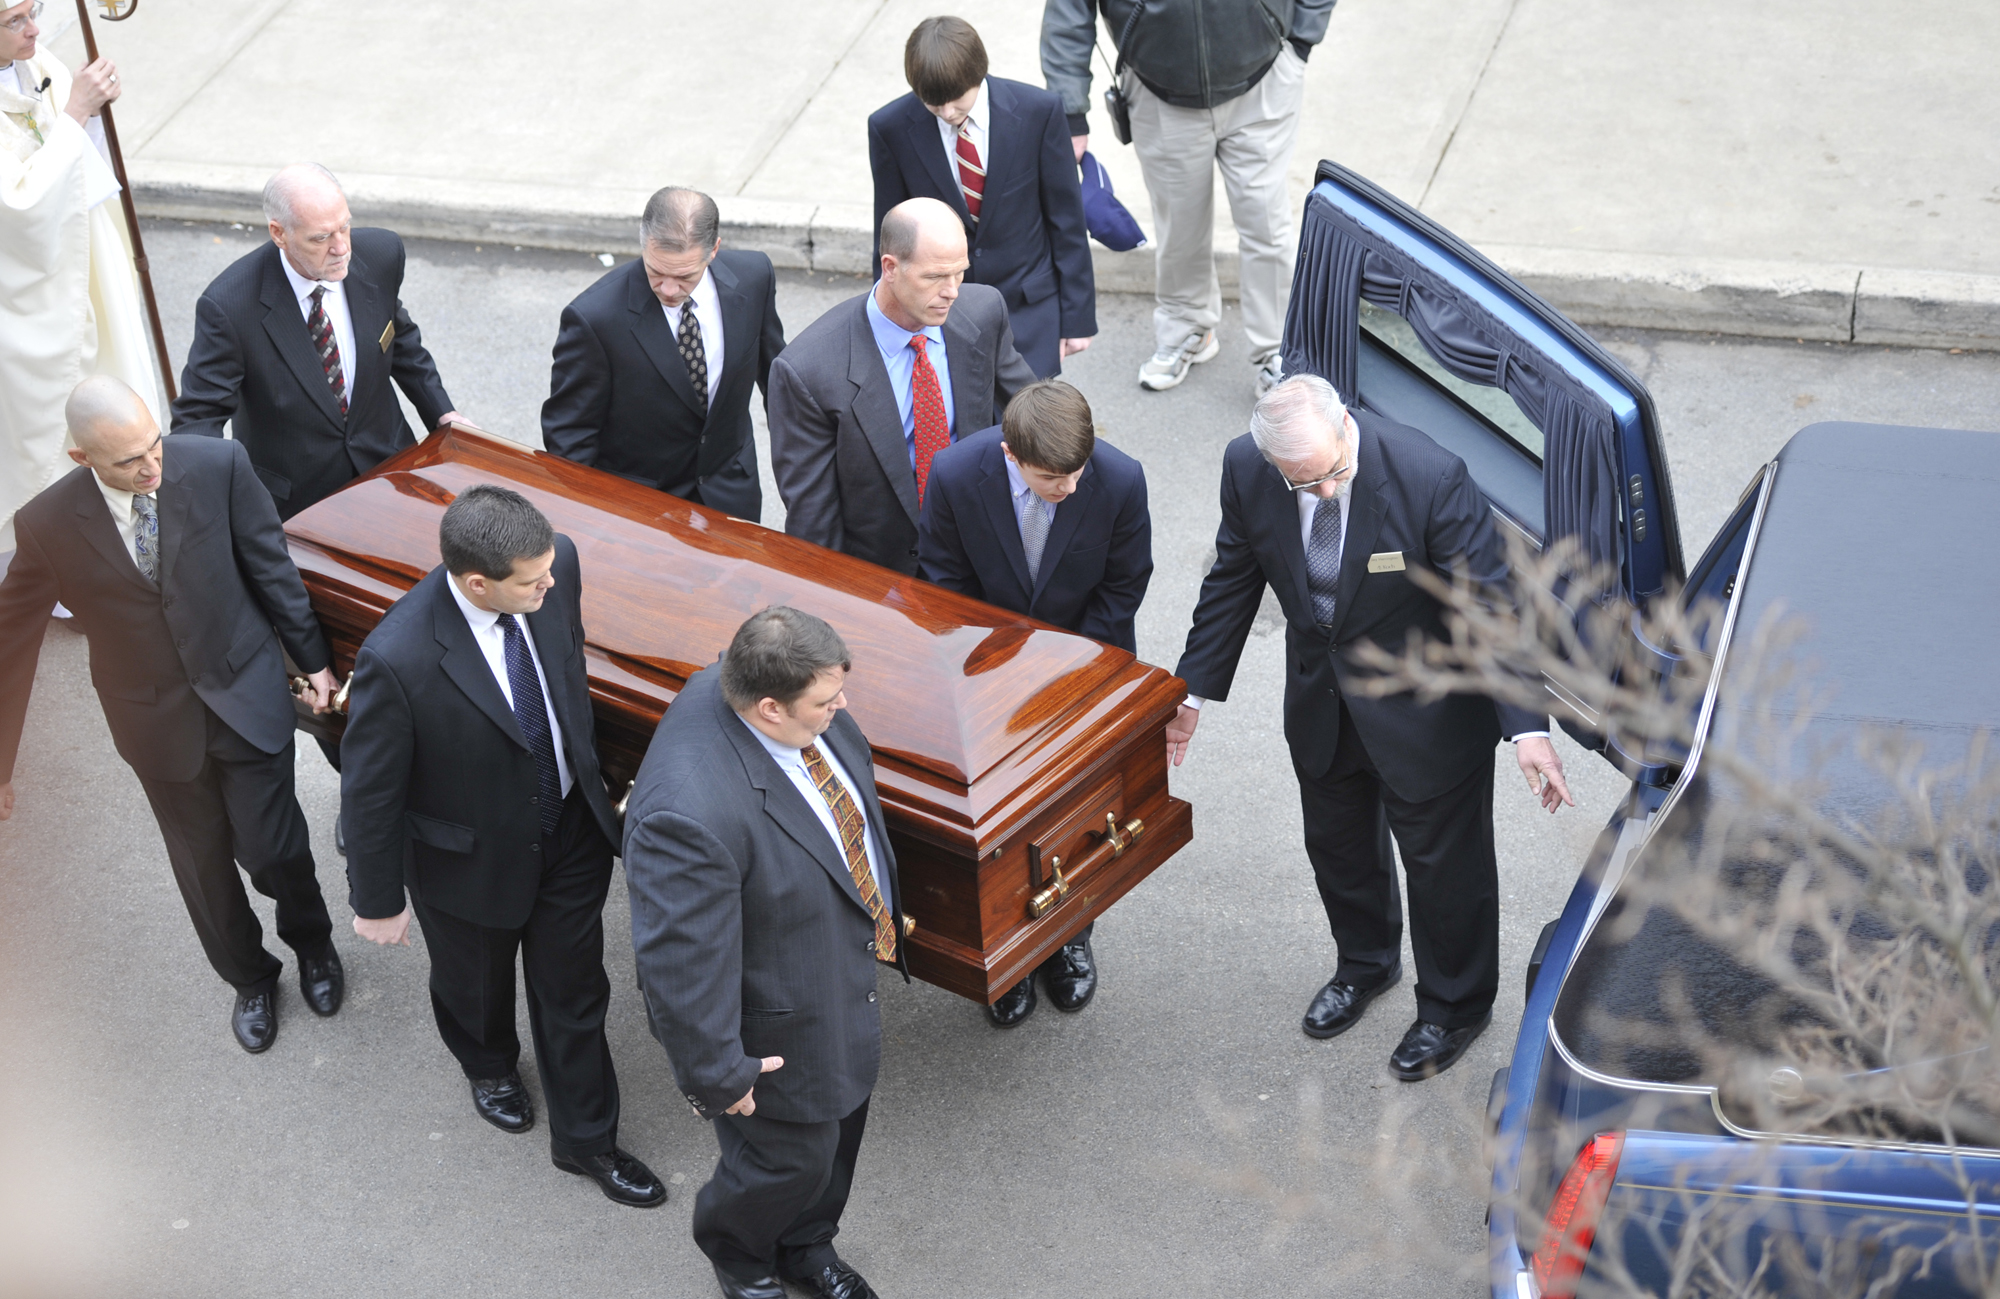  Pallbearers carry the casket of former head football coach Joe Paterno to the hearse parked outside of the Pasquerilla Spiritual Center on Wednesday, Jan. 25, 2012 before the funeral procession around State College. 